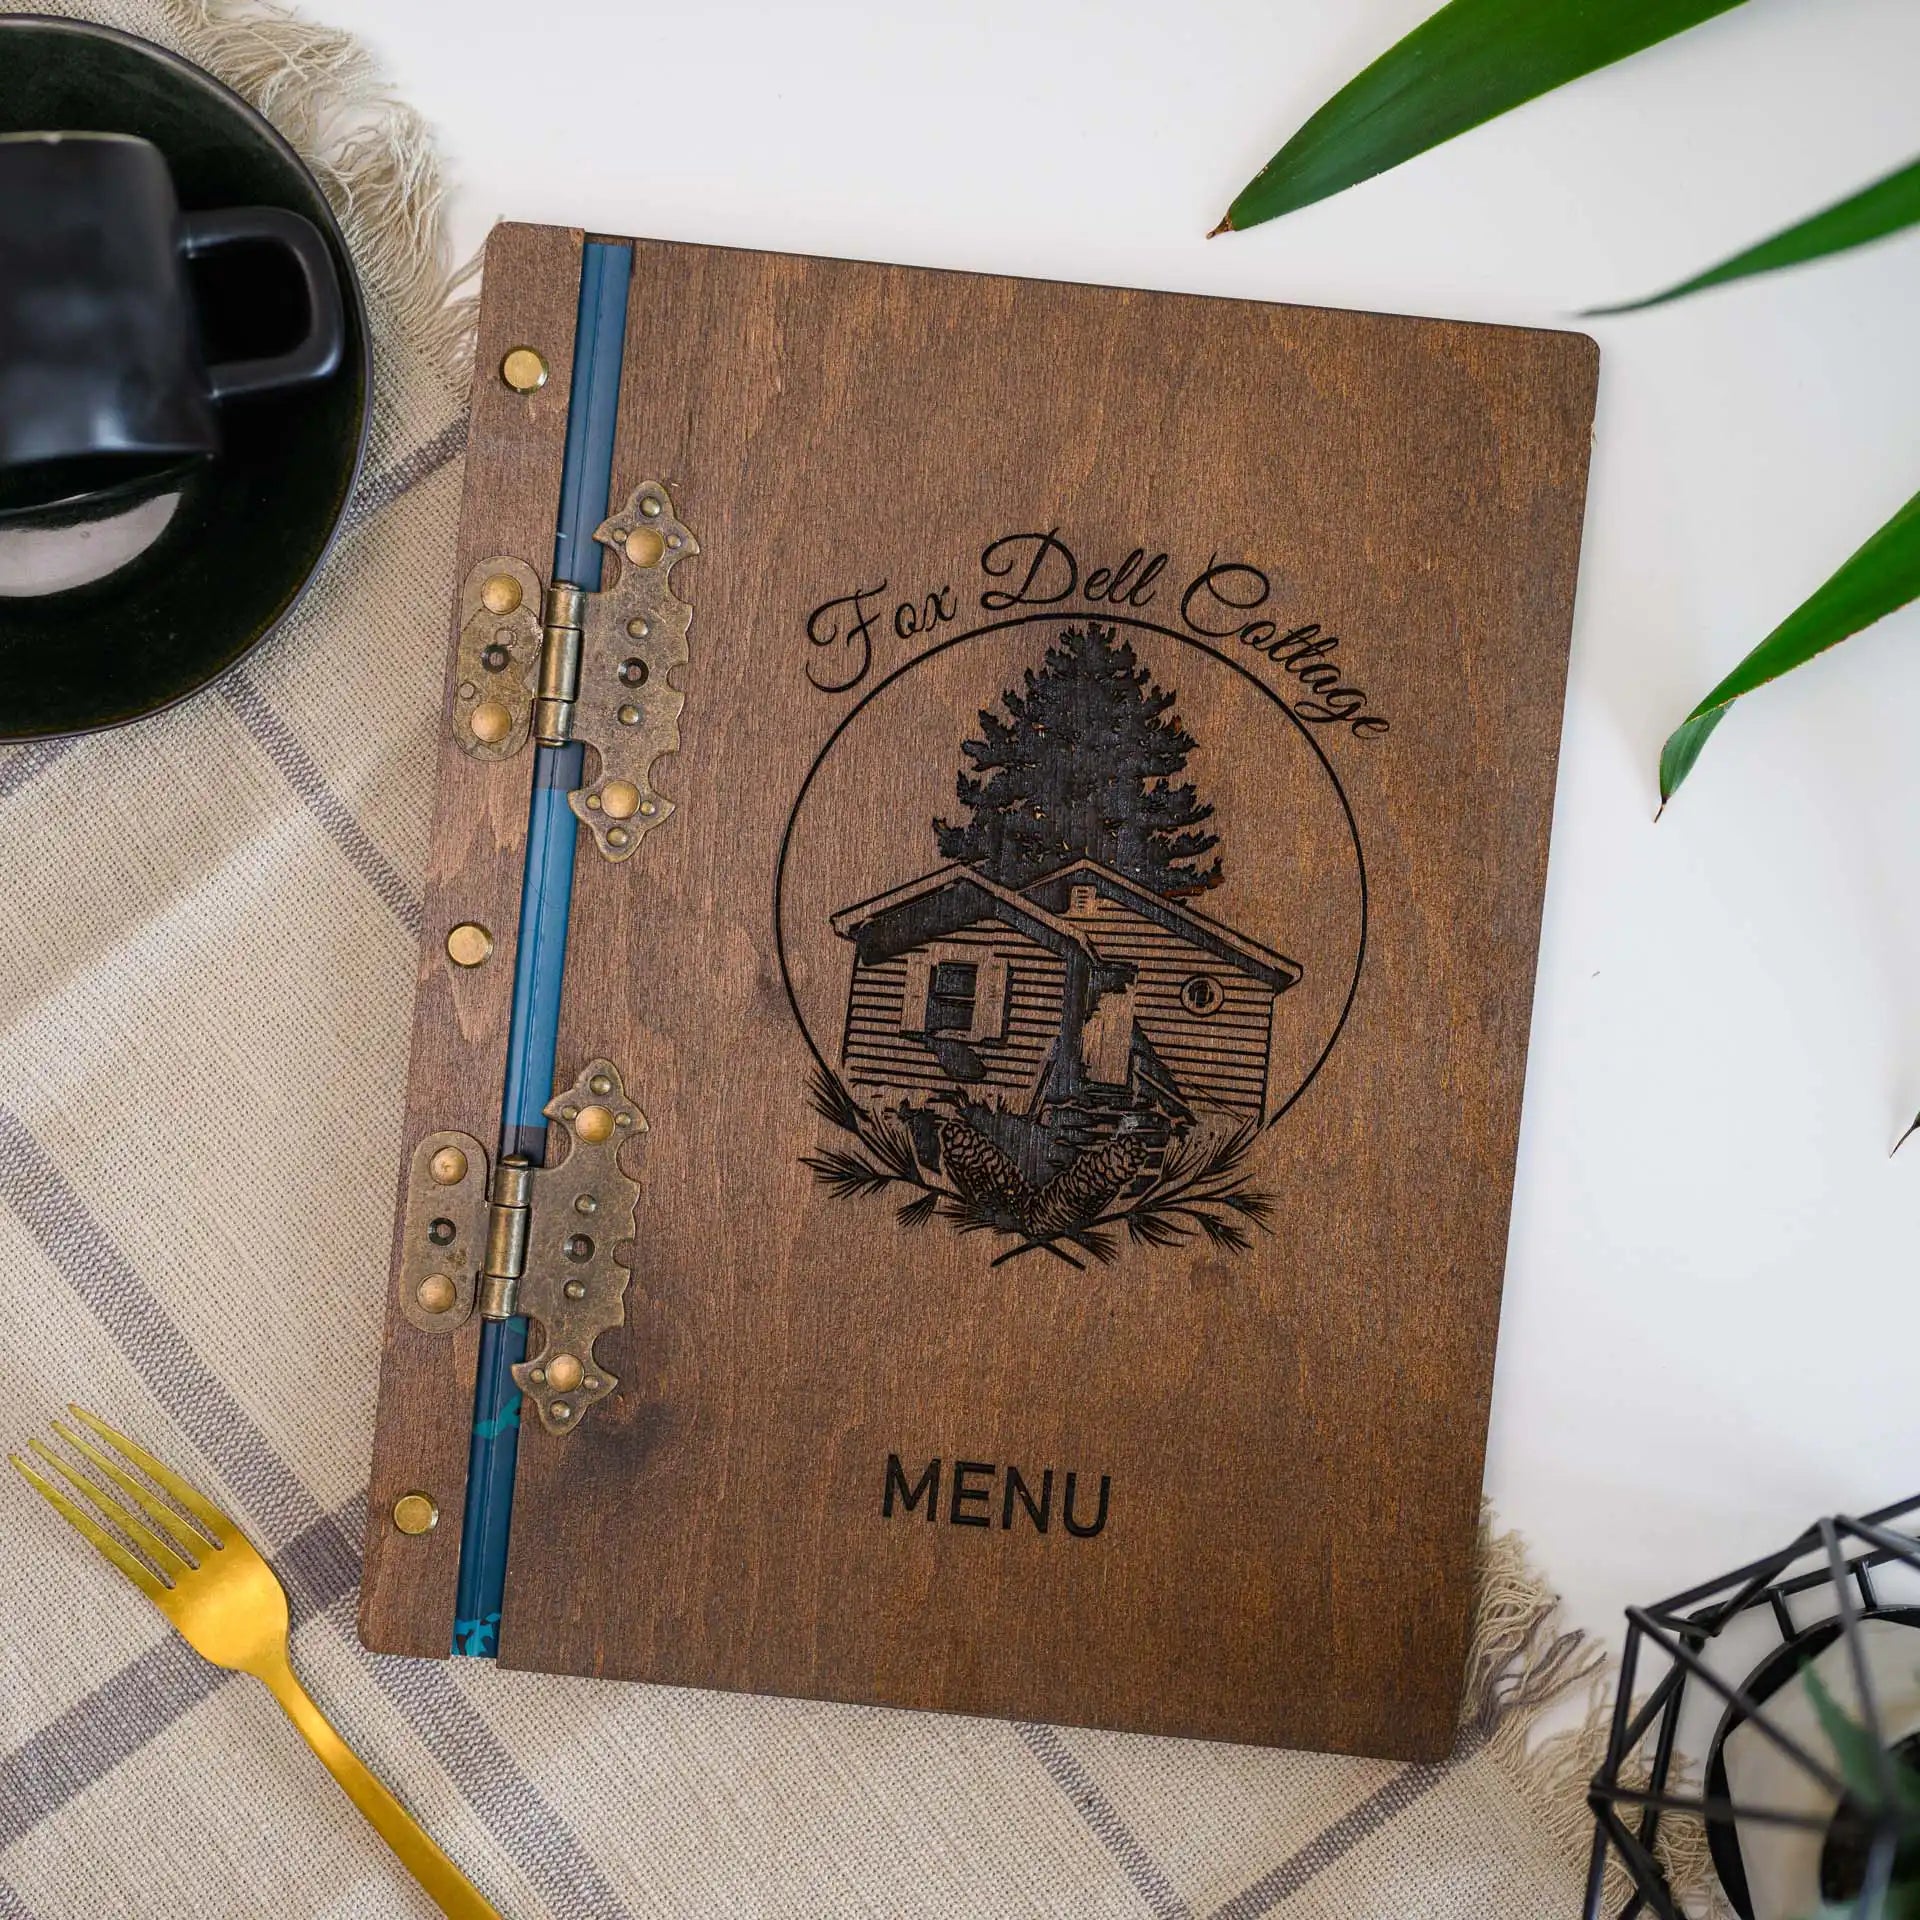 Wooden Menu Cover with Hinges: Offers a rustic charm with practicality for easy flipping.